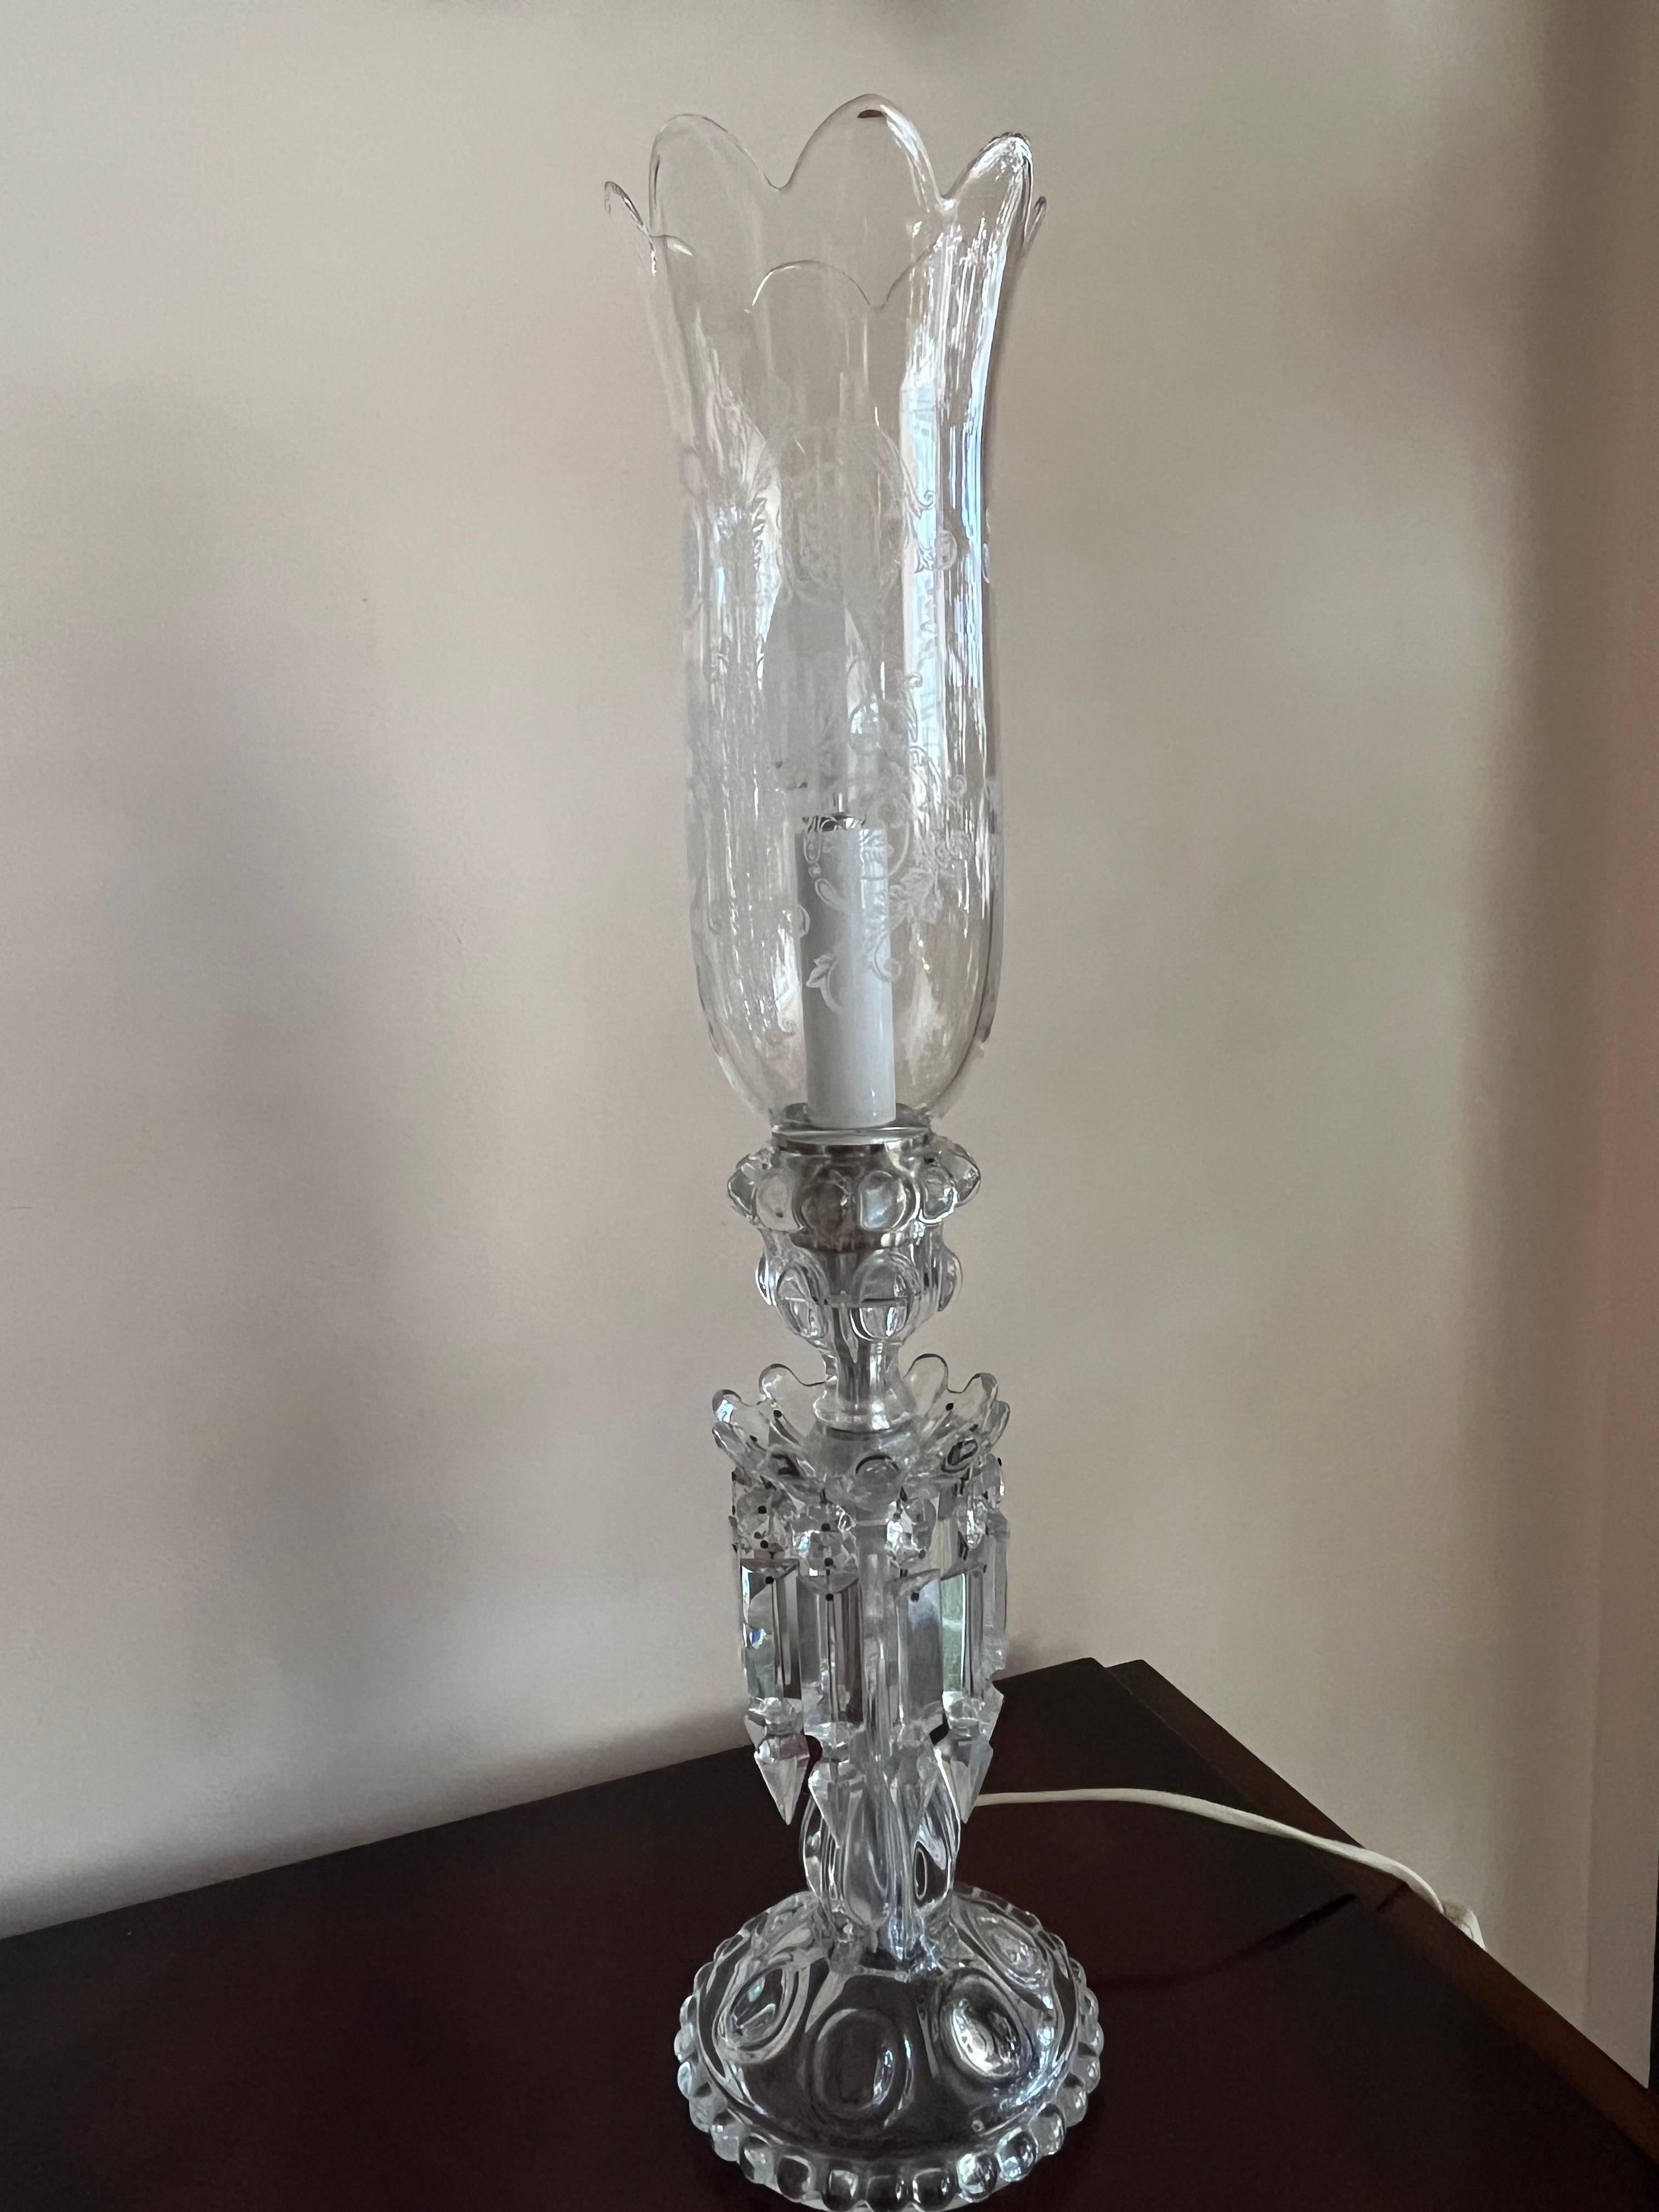 French Baccarat crystal table lamp, 1990s
Very small signs of the time, intact and functional.